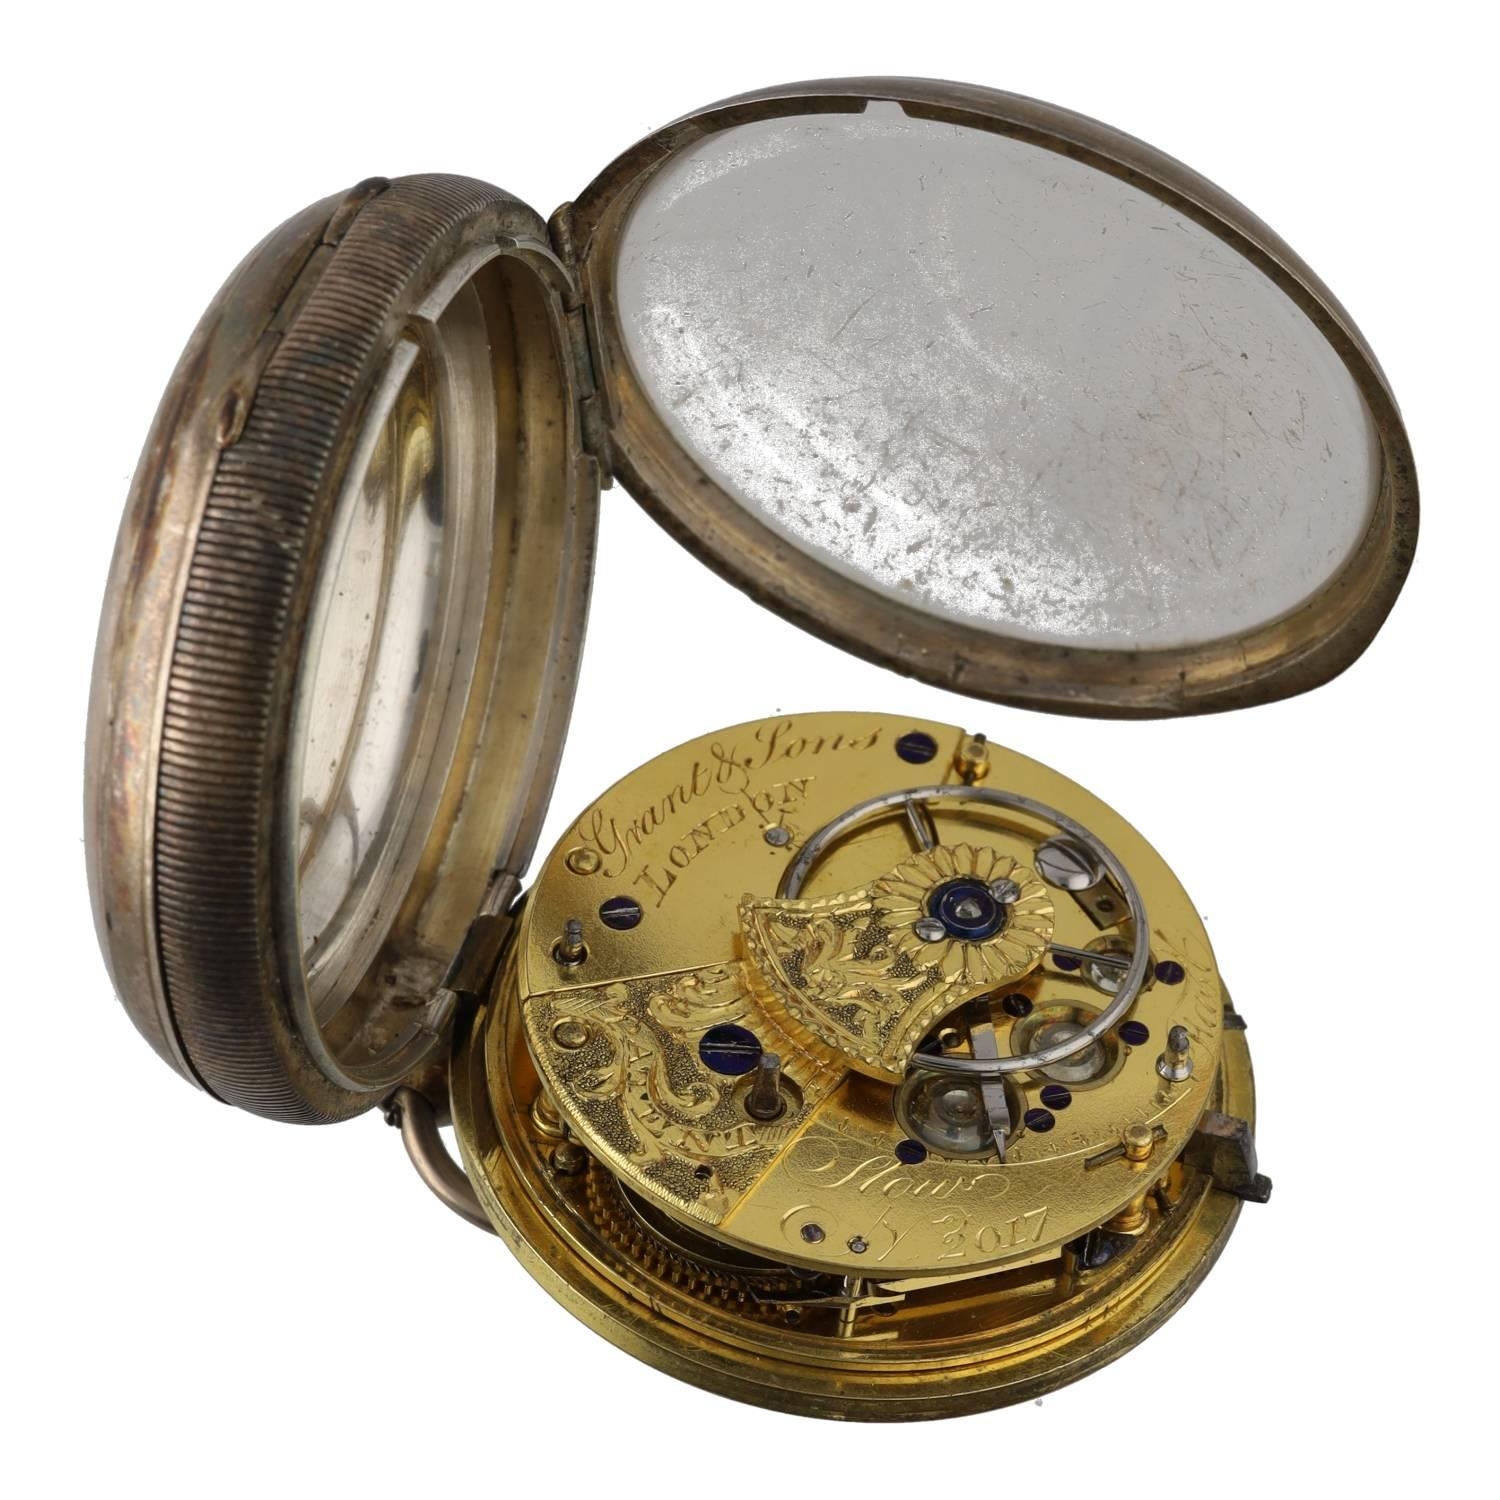 Grant & Sons, London - mid-19th century silver fusee rack lever pocket watch, Dublin 1862, signed - Image 3 of 4